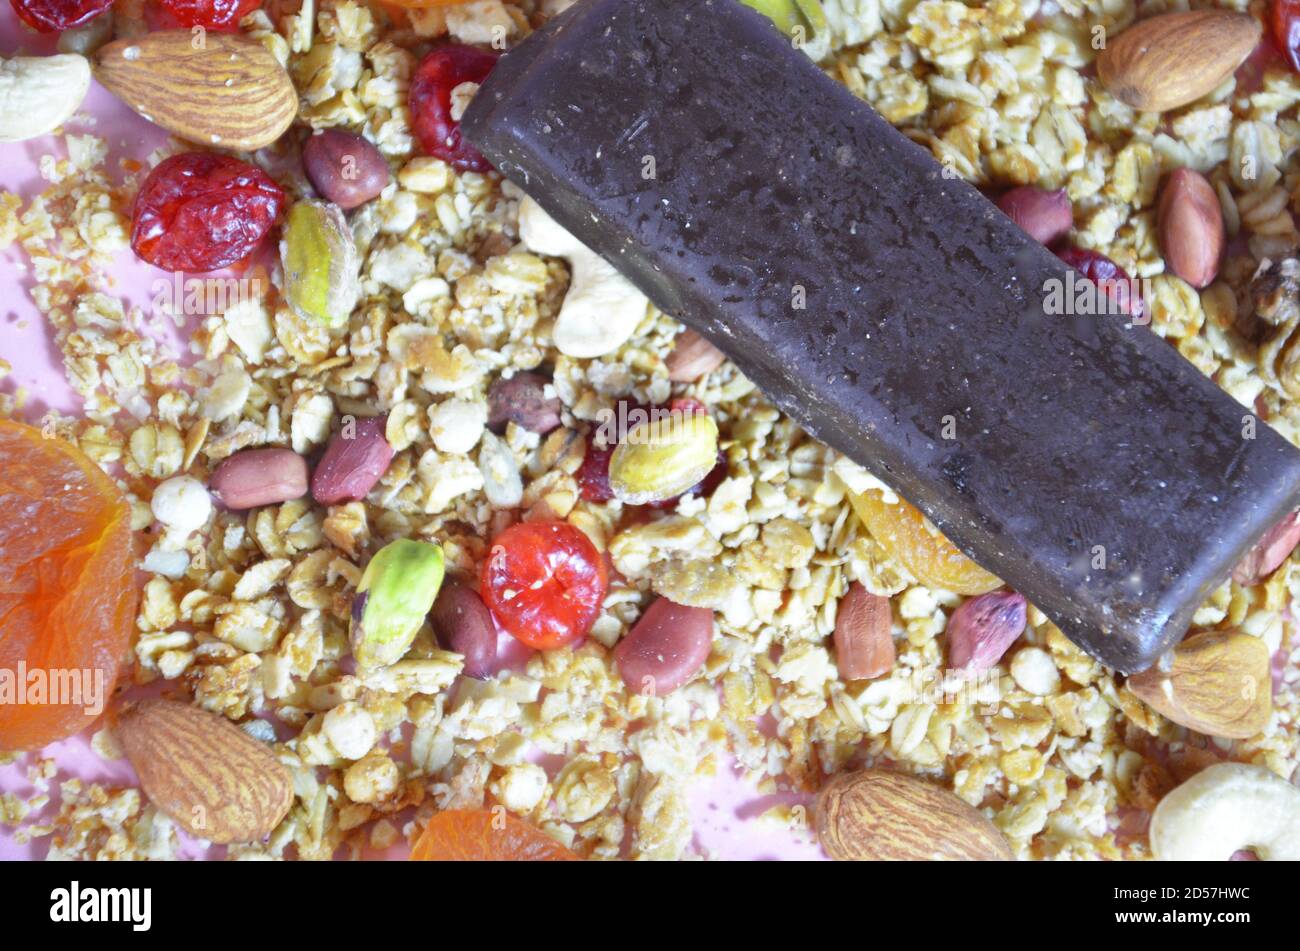 Granola bars, muesli bars or energy bars with oats, dates and nuts on white pink background, close up. Snack for yoga, fitness and sports people Stock Photo